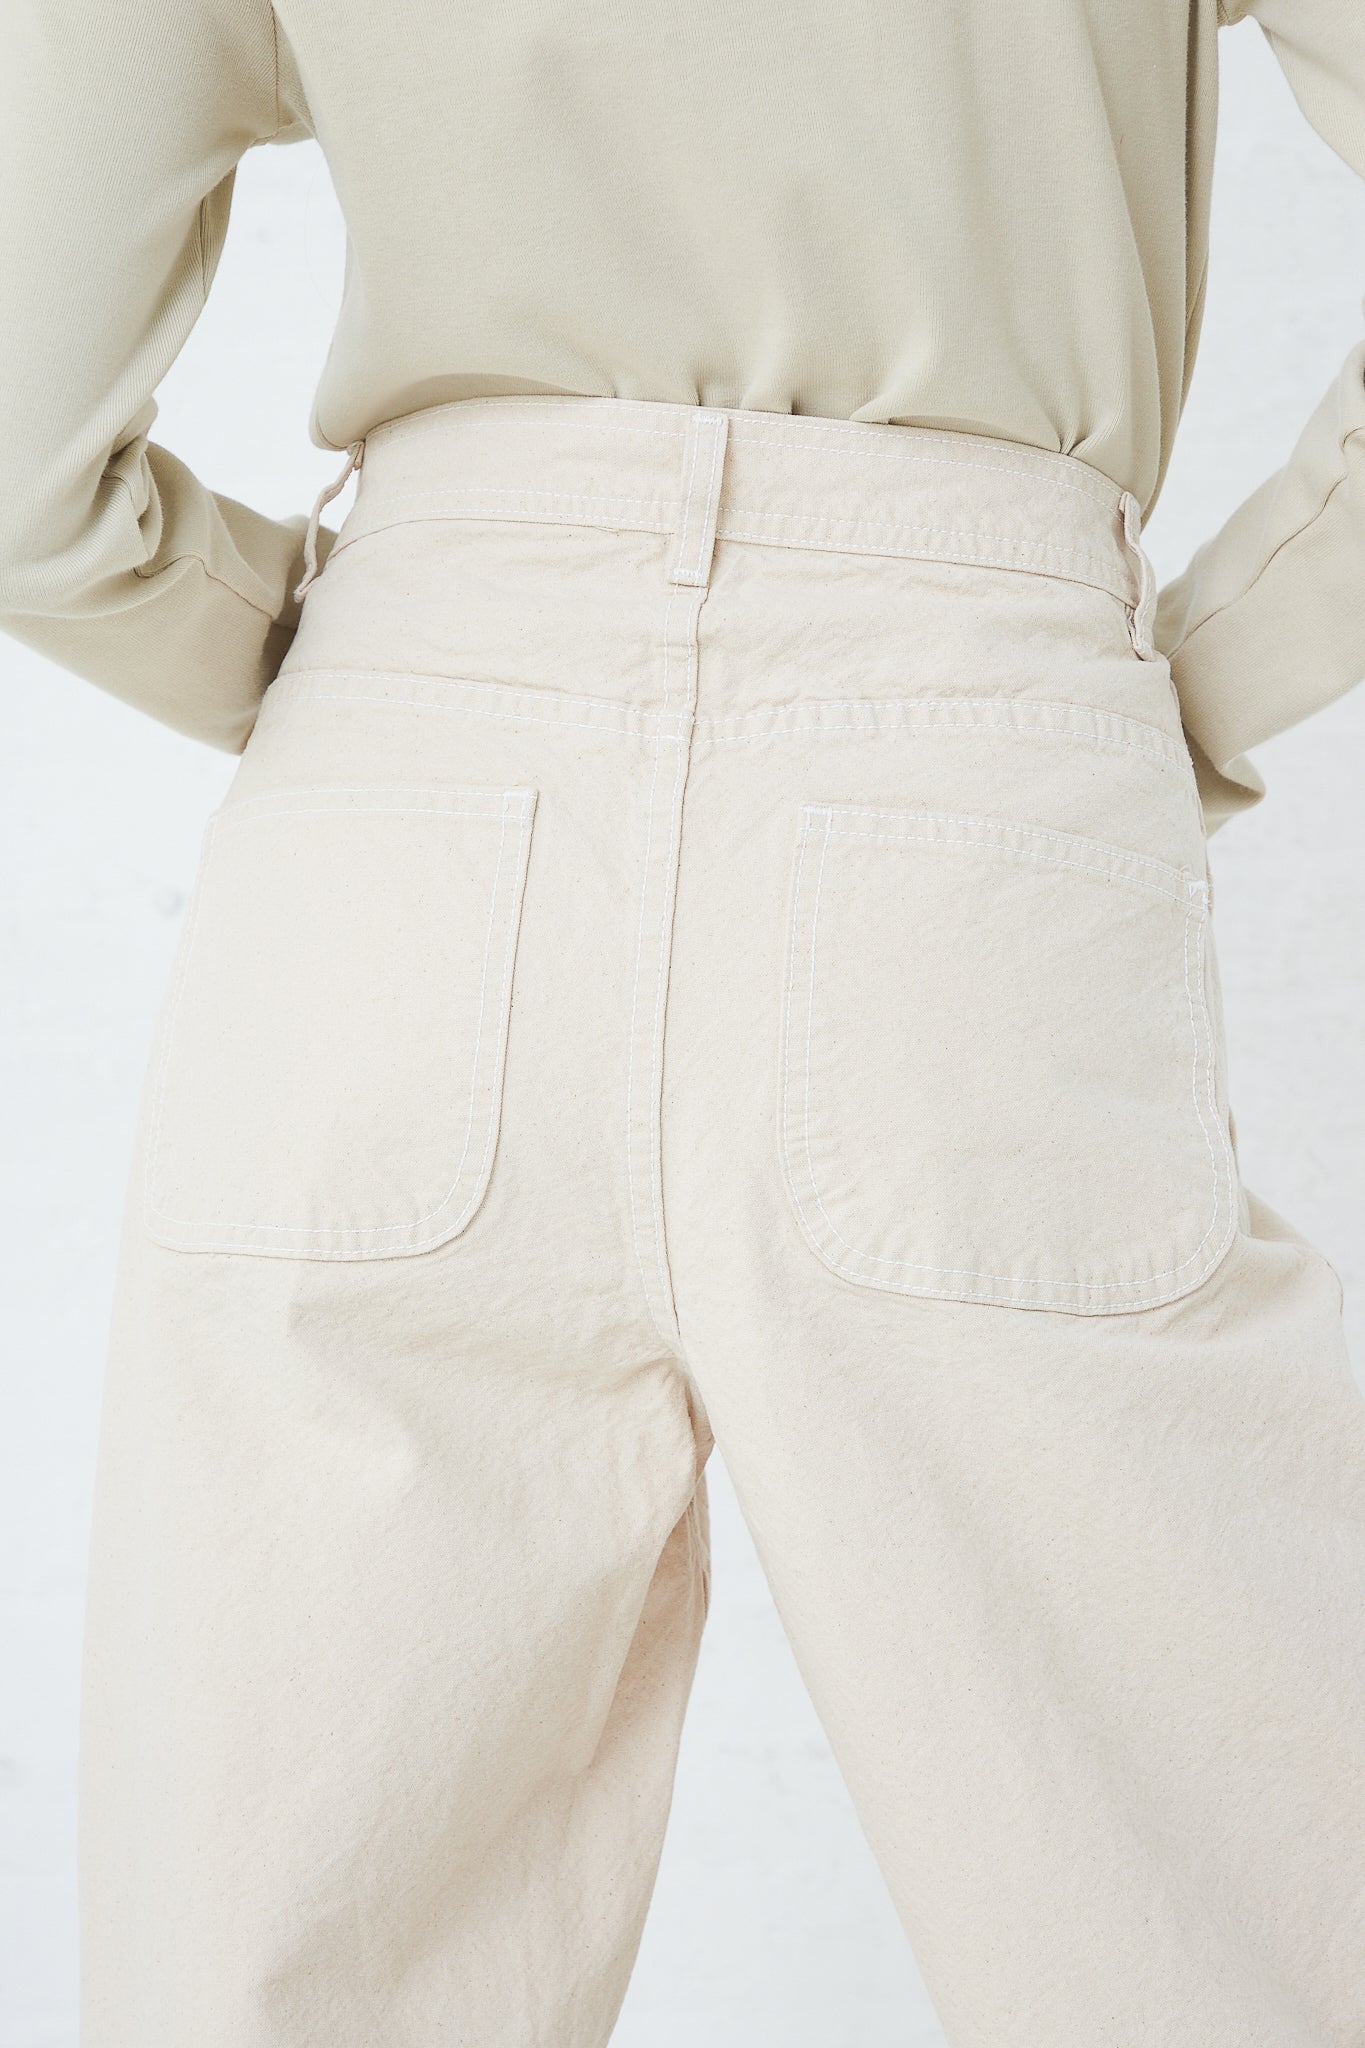 The back view of a woman wearing Jesse Kamm's Organic Canvas California Wide in Natural beige pants made from organic cotton.